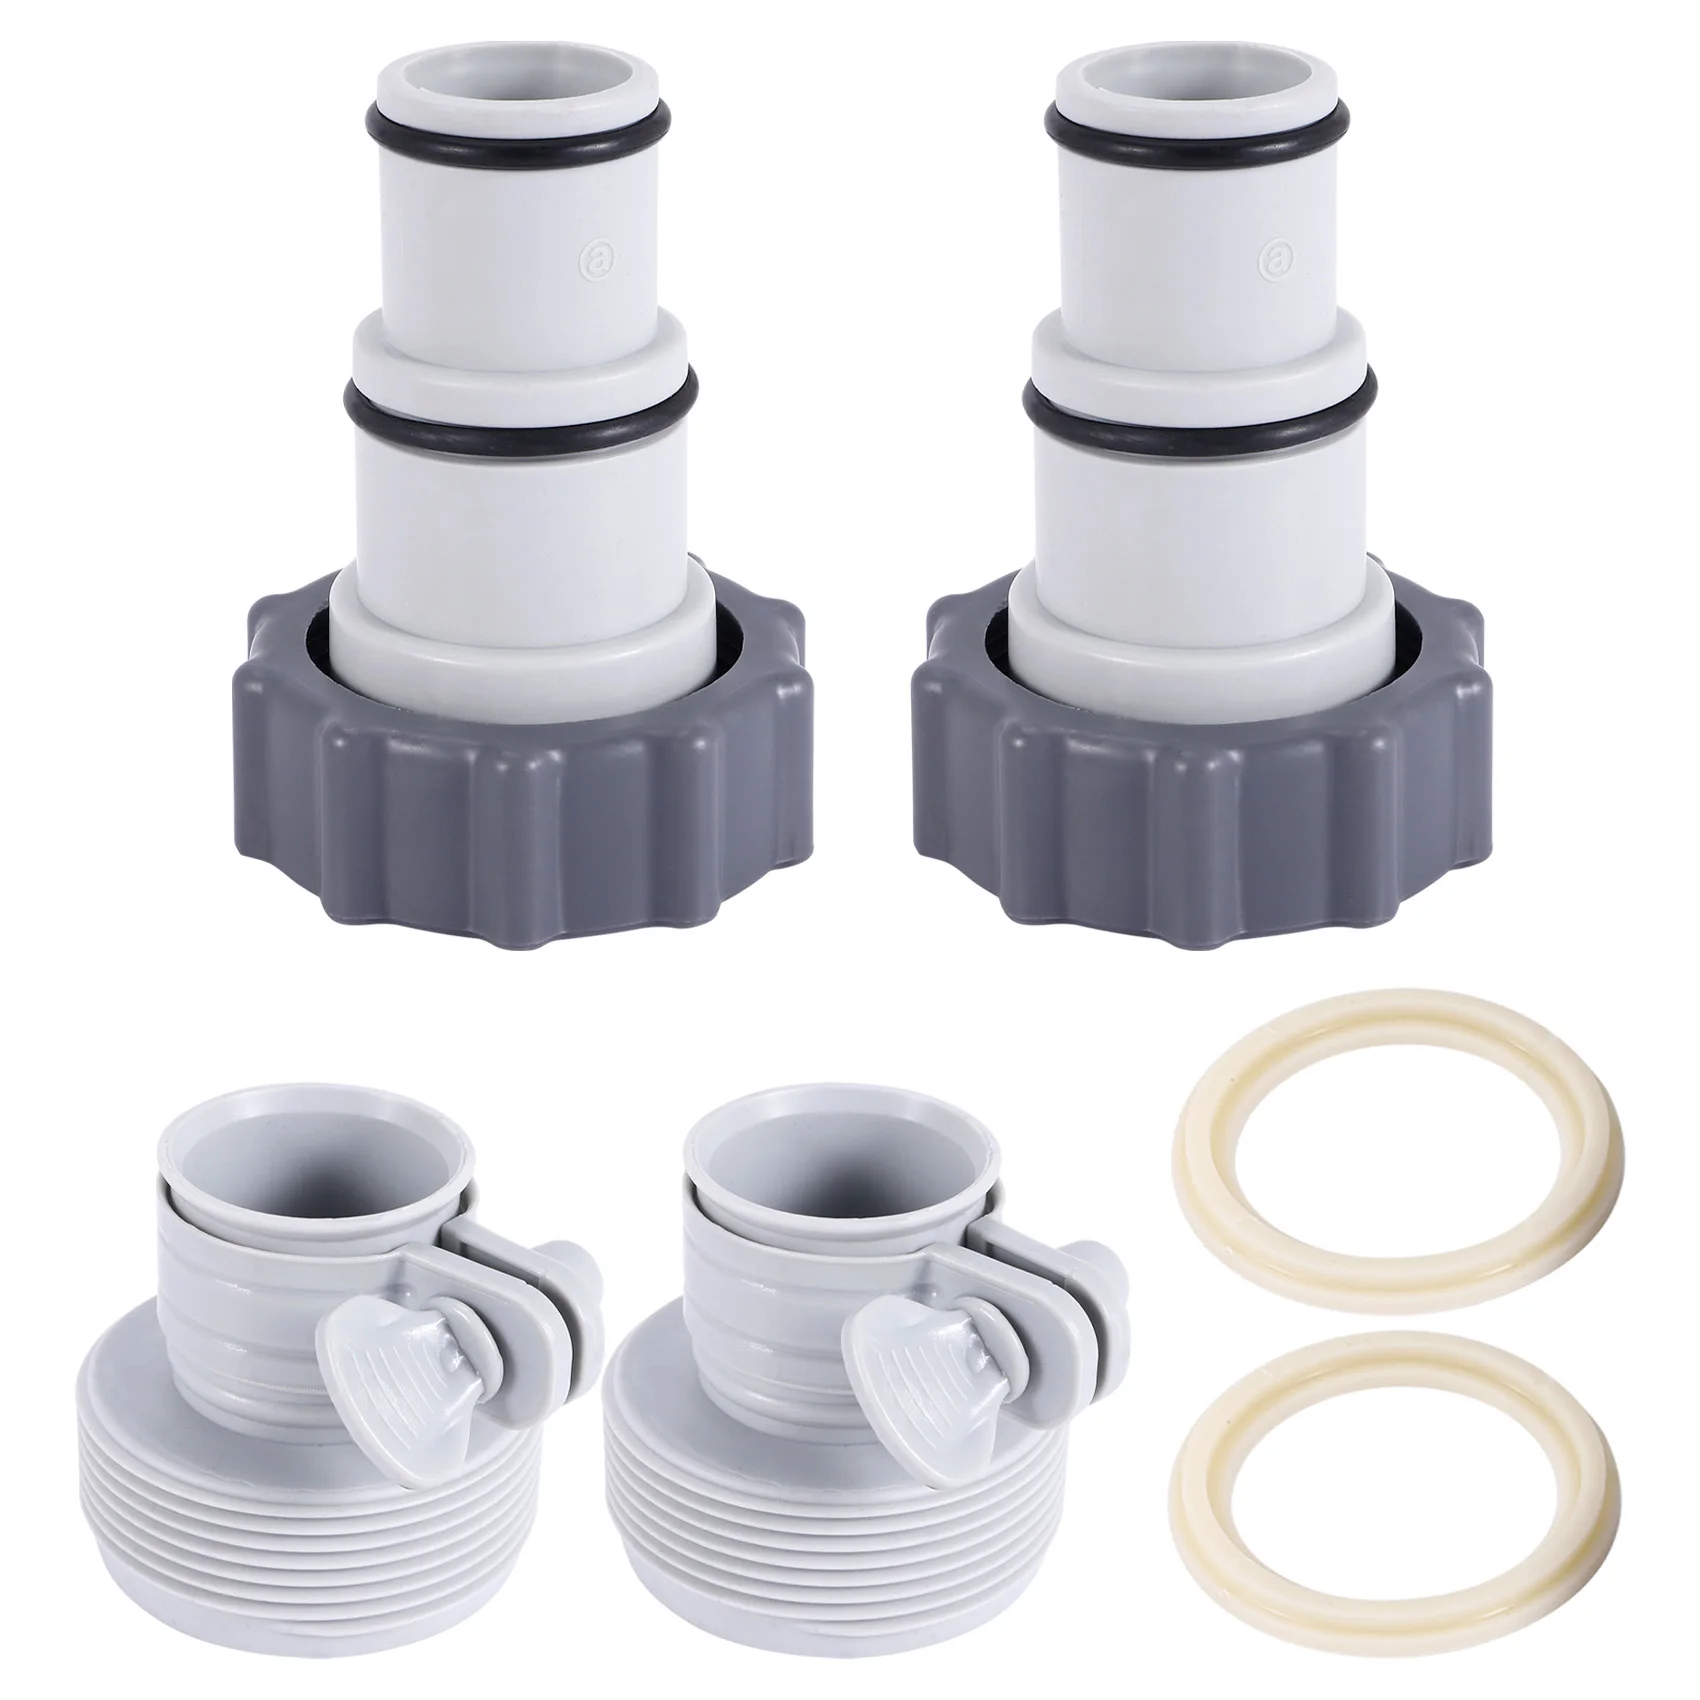 

Replacement Hose Drain Plug Connector Adapter a W/Collar&B Kit Pool Drain Adapter,Converts 1.25 to 1.5 Inch Pool Hose